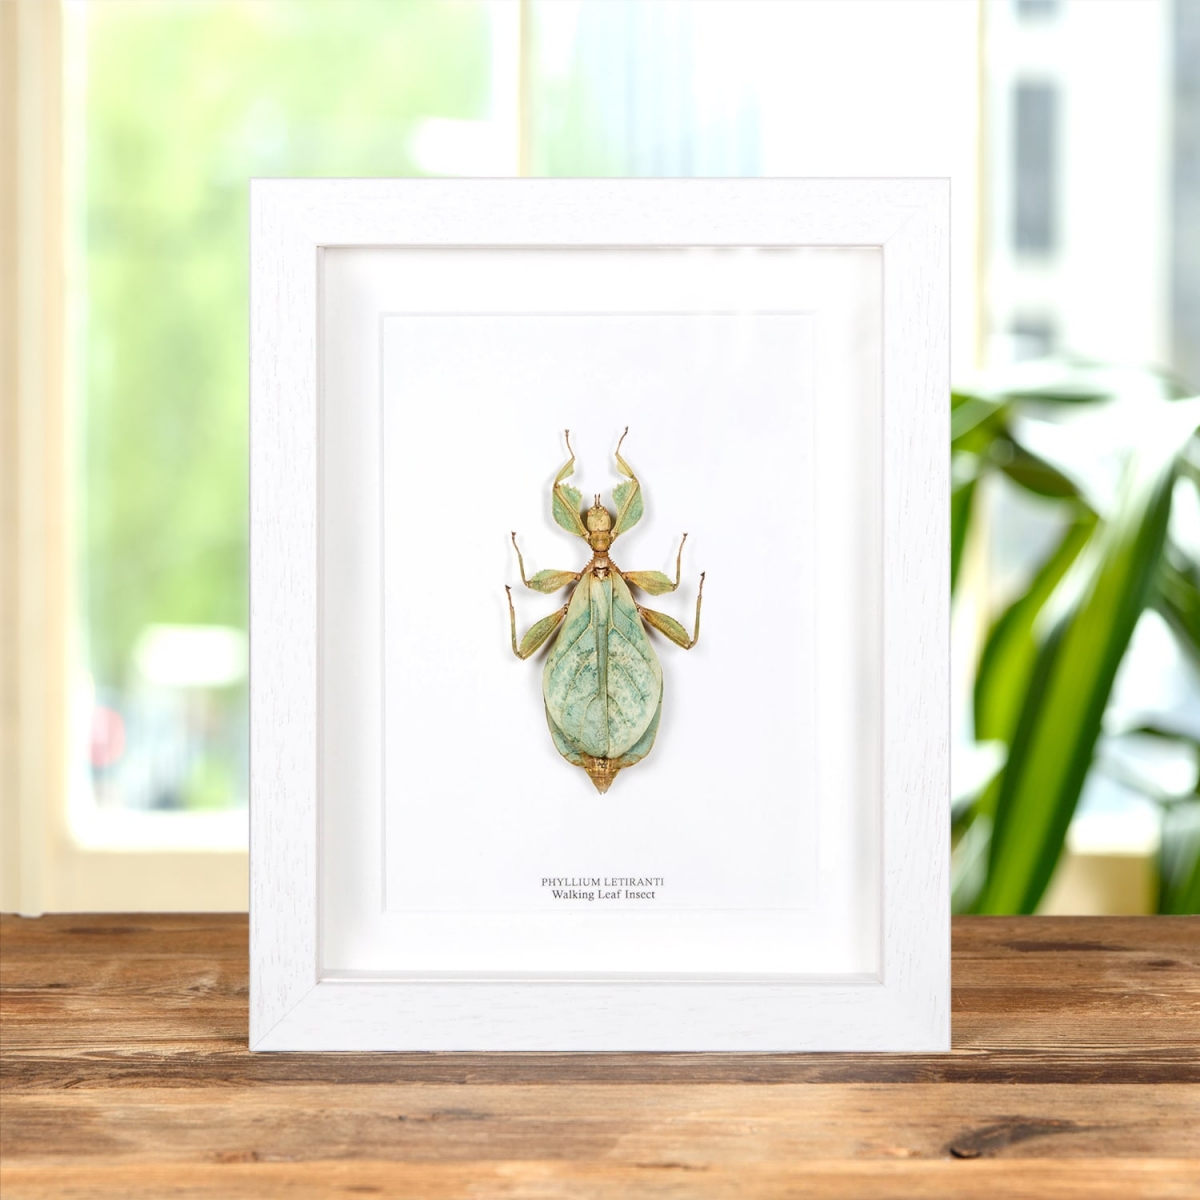 Walking Leaf Insect in Box Frame (Phyllium letiranti)